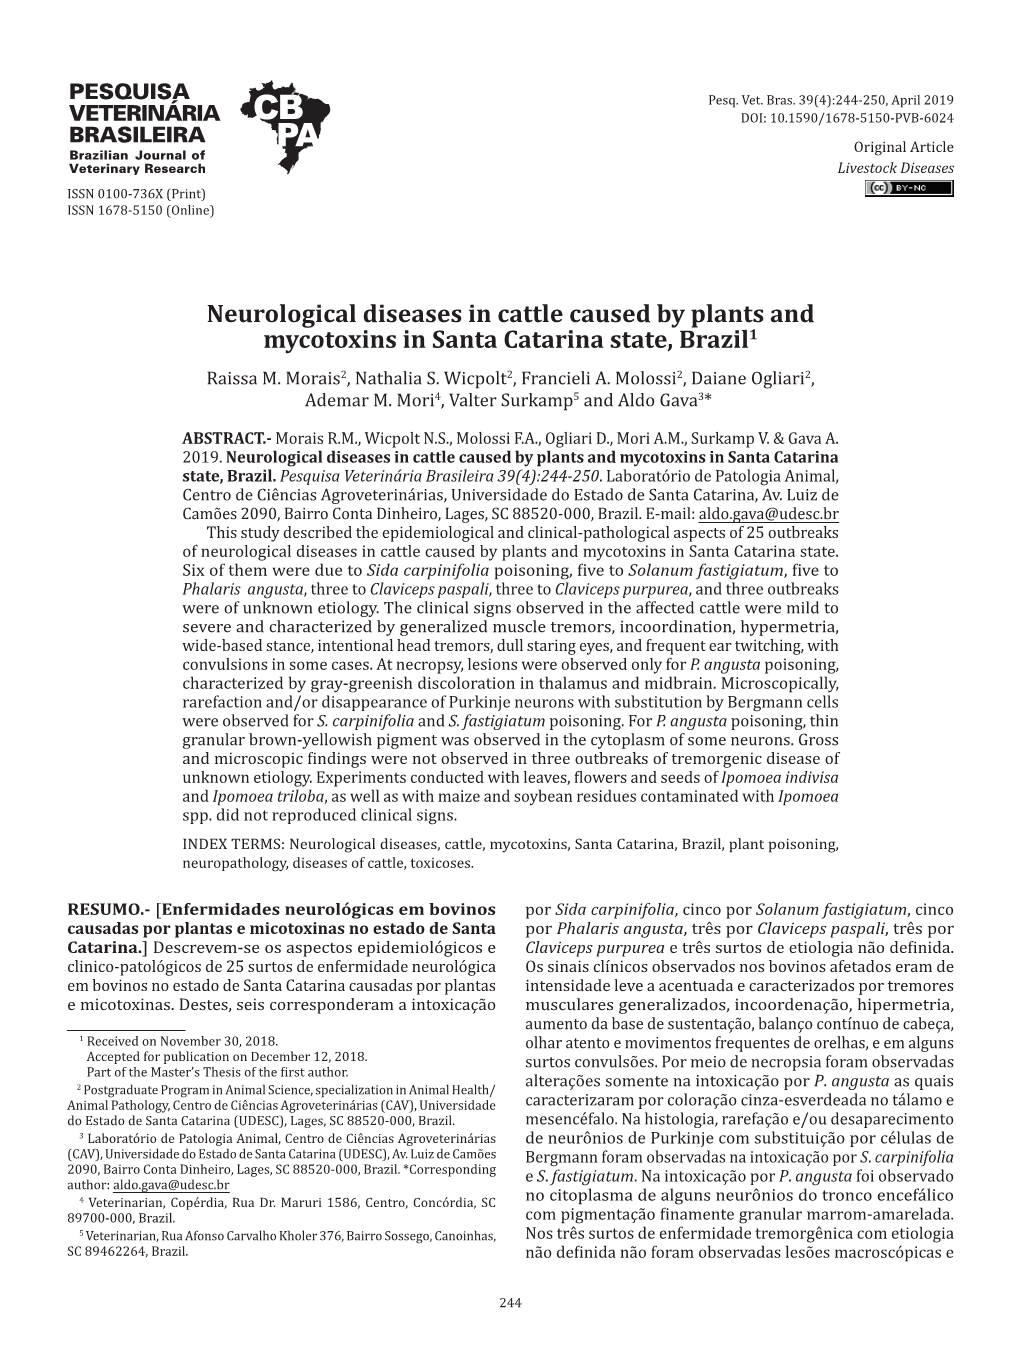 Neurological Diseases in Cattle Caused by Plants and Mycotoxins in Santa Catarina State, Brazil1 Raissa M